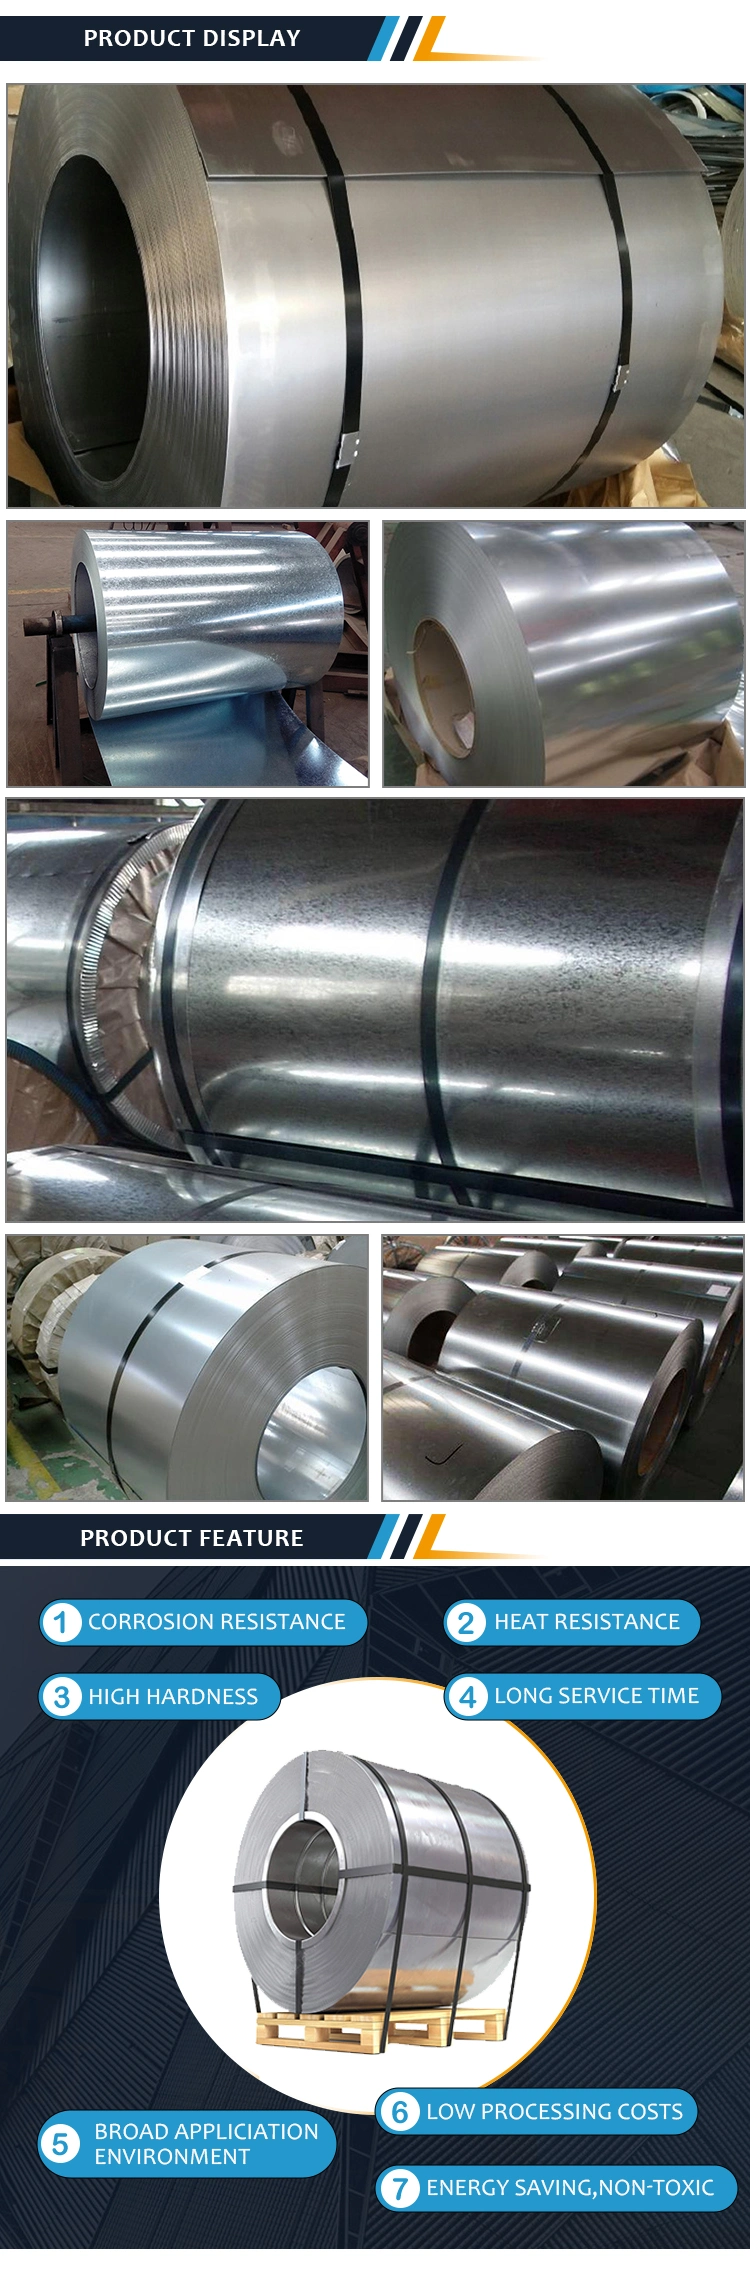 Stainless Steel Material Supplier Offers Stainless Steel Flat Plate, Stainless Steel Coil and Other Stainless Steel Products with Complete Spe